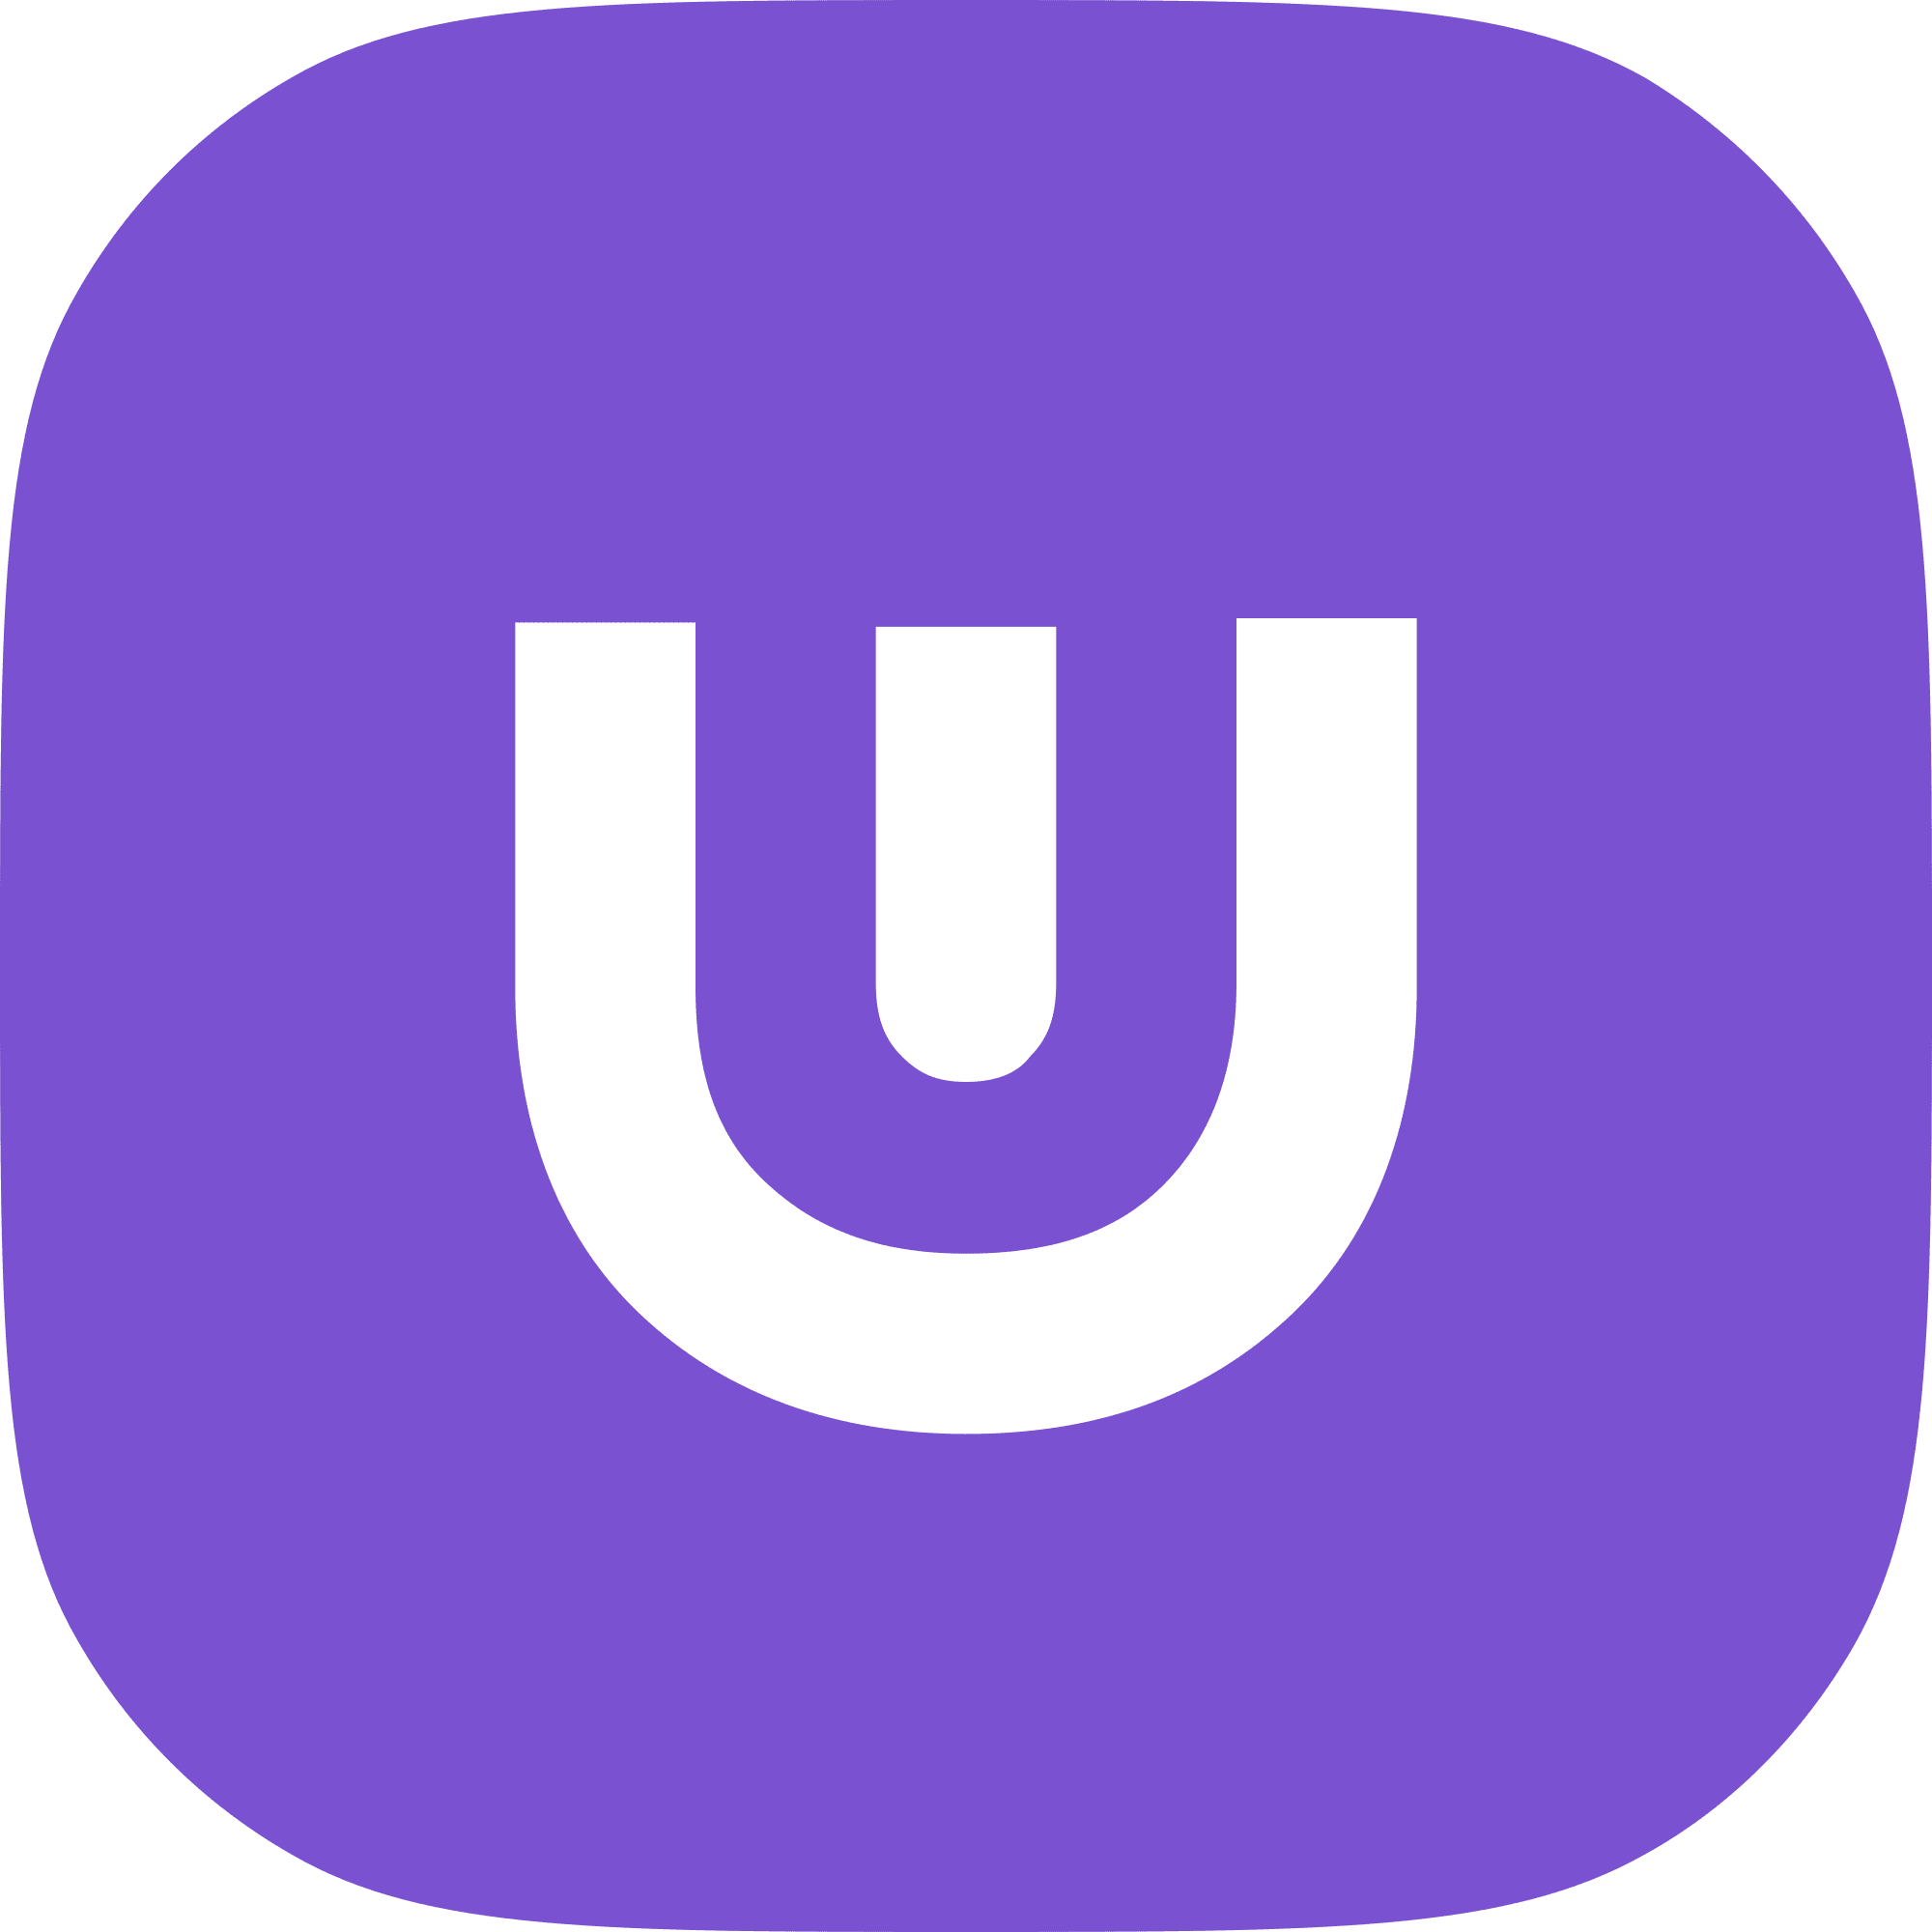 Ultra logo in png format